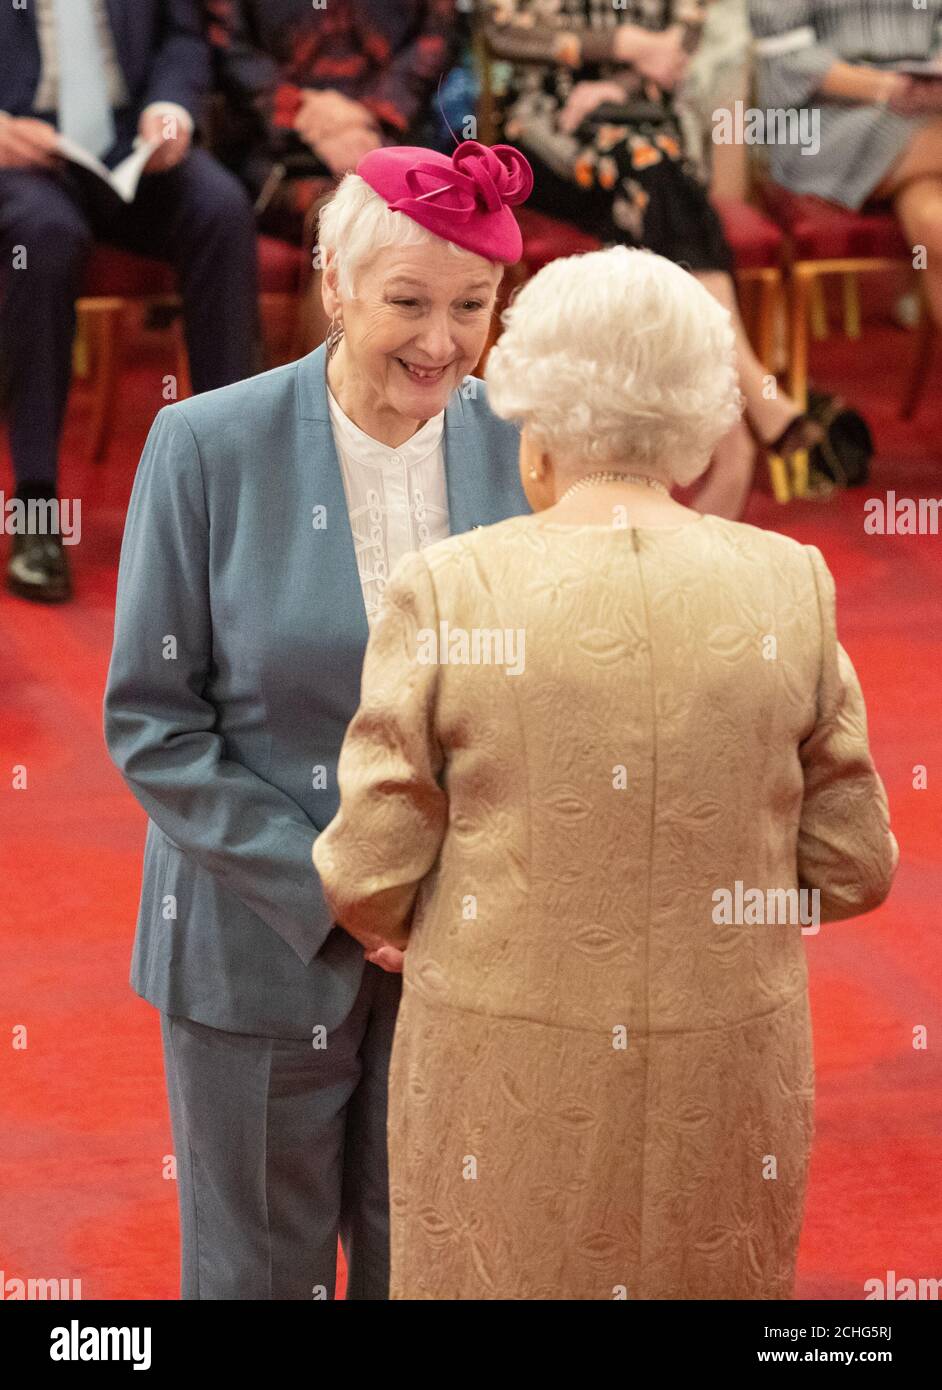 Susan Lamford, known professionally as Kate Flatt is made an OBE (Officer of the Order of the British Empire) by Queen Elizabeth II during an investiture ceremony at Buckingham Palace in London. Stock Photo